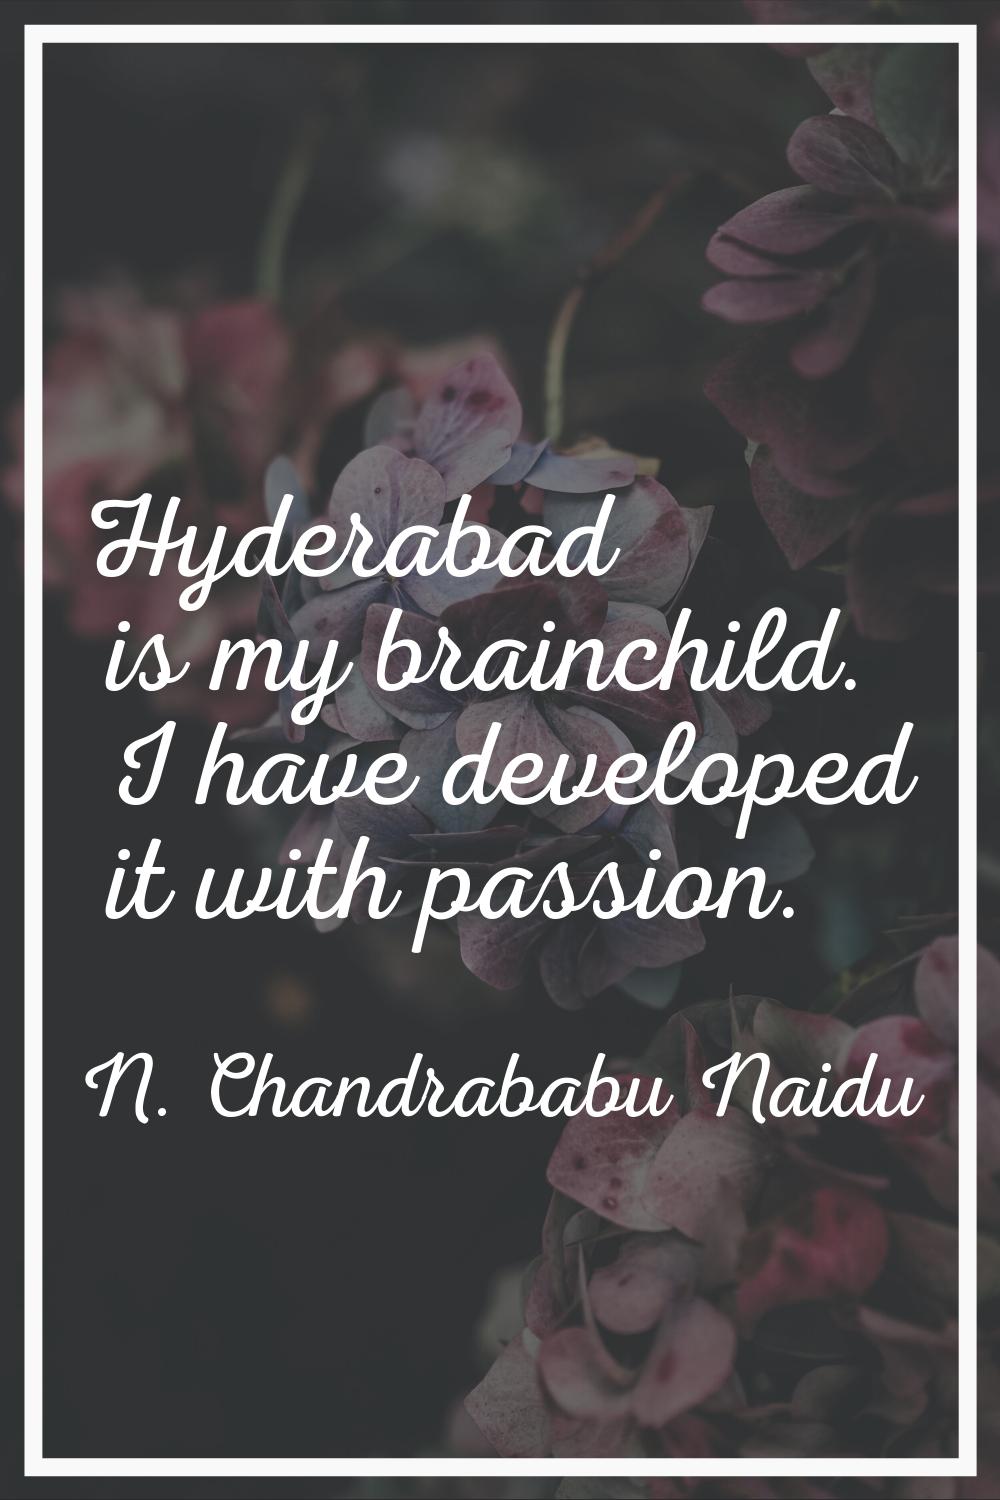 Hyderabad is my brainchild. I have developed it with passion.